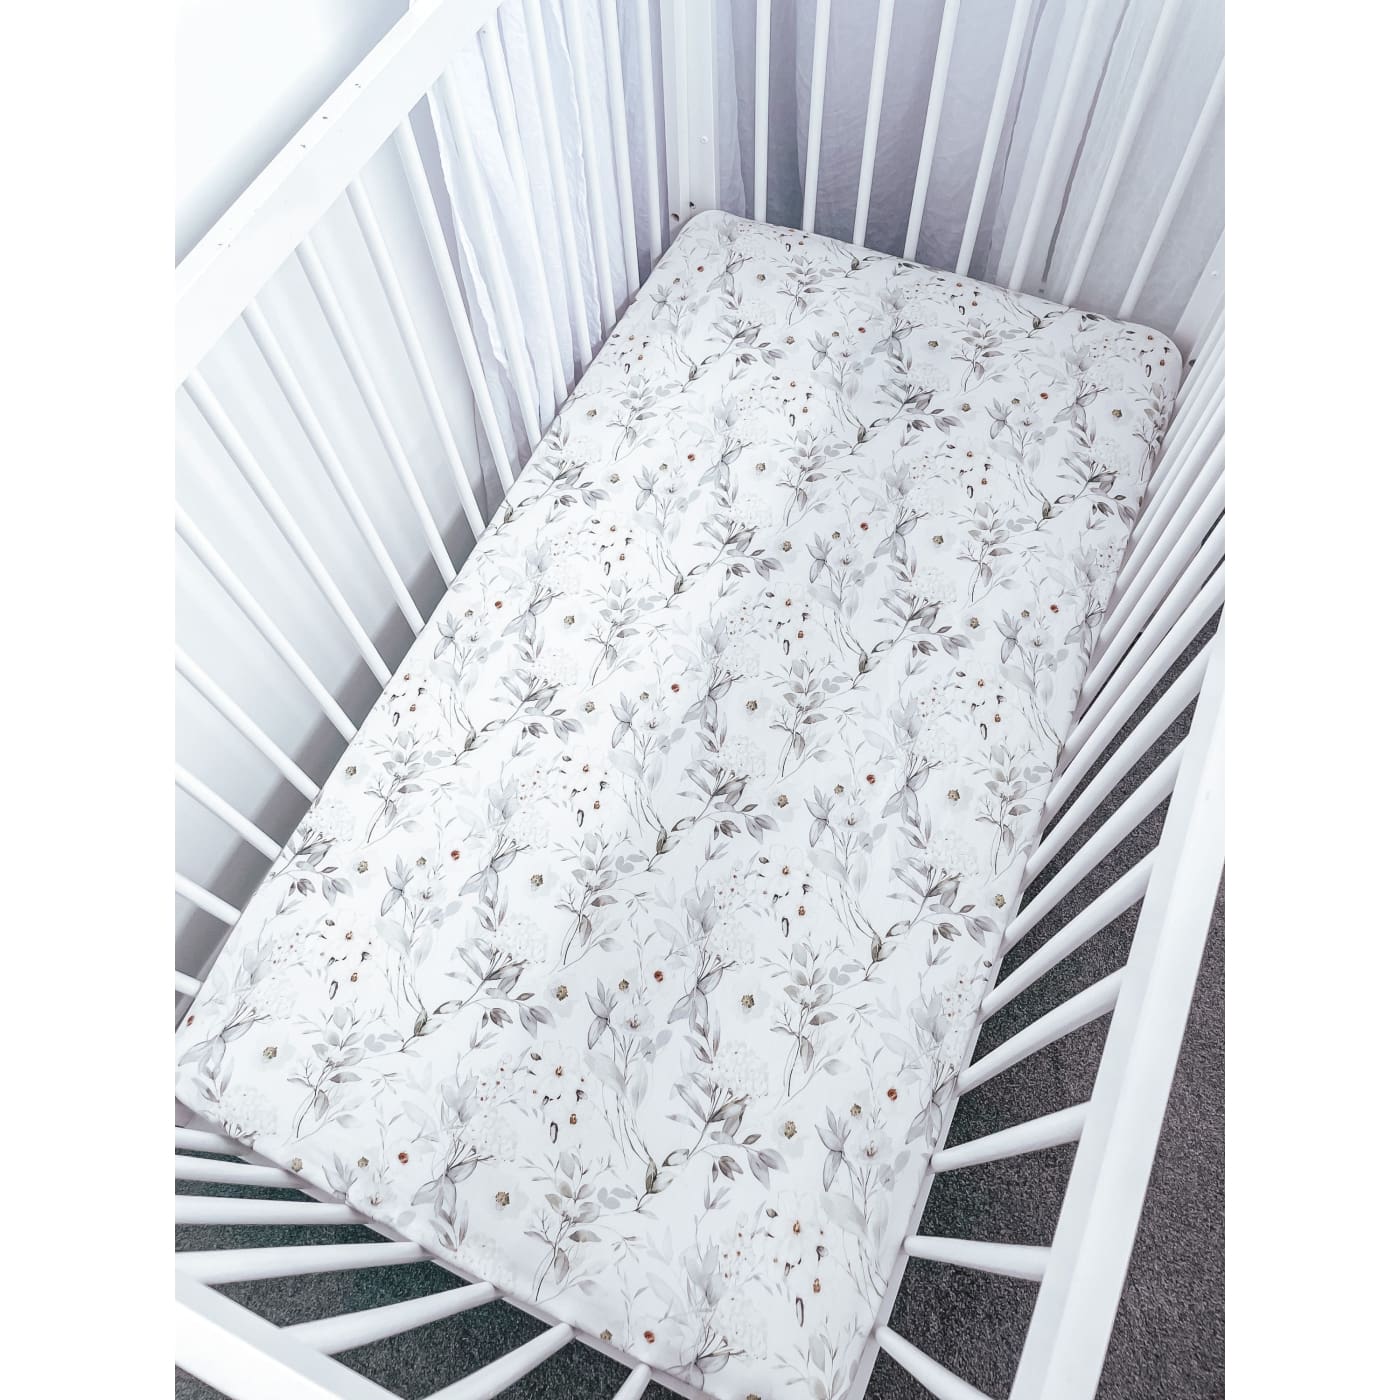 Lil Miimie Jersey Cotton Cot Sheet - White Floral - NURSERY & BEDTIME - COT MANCHESTER